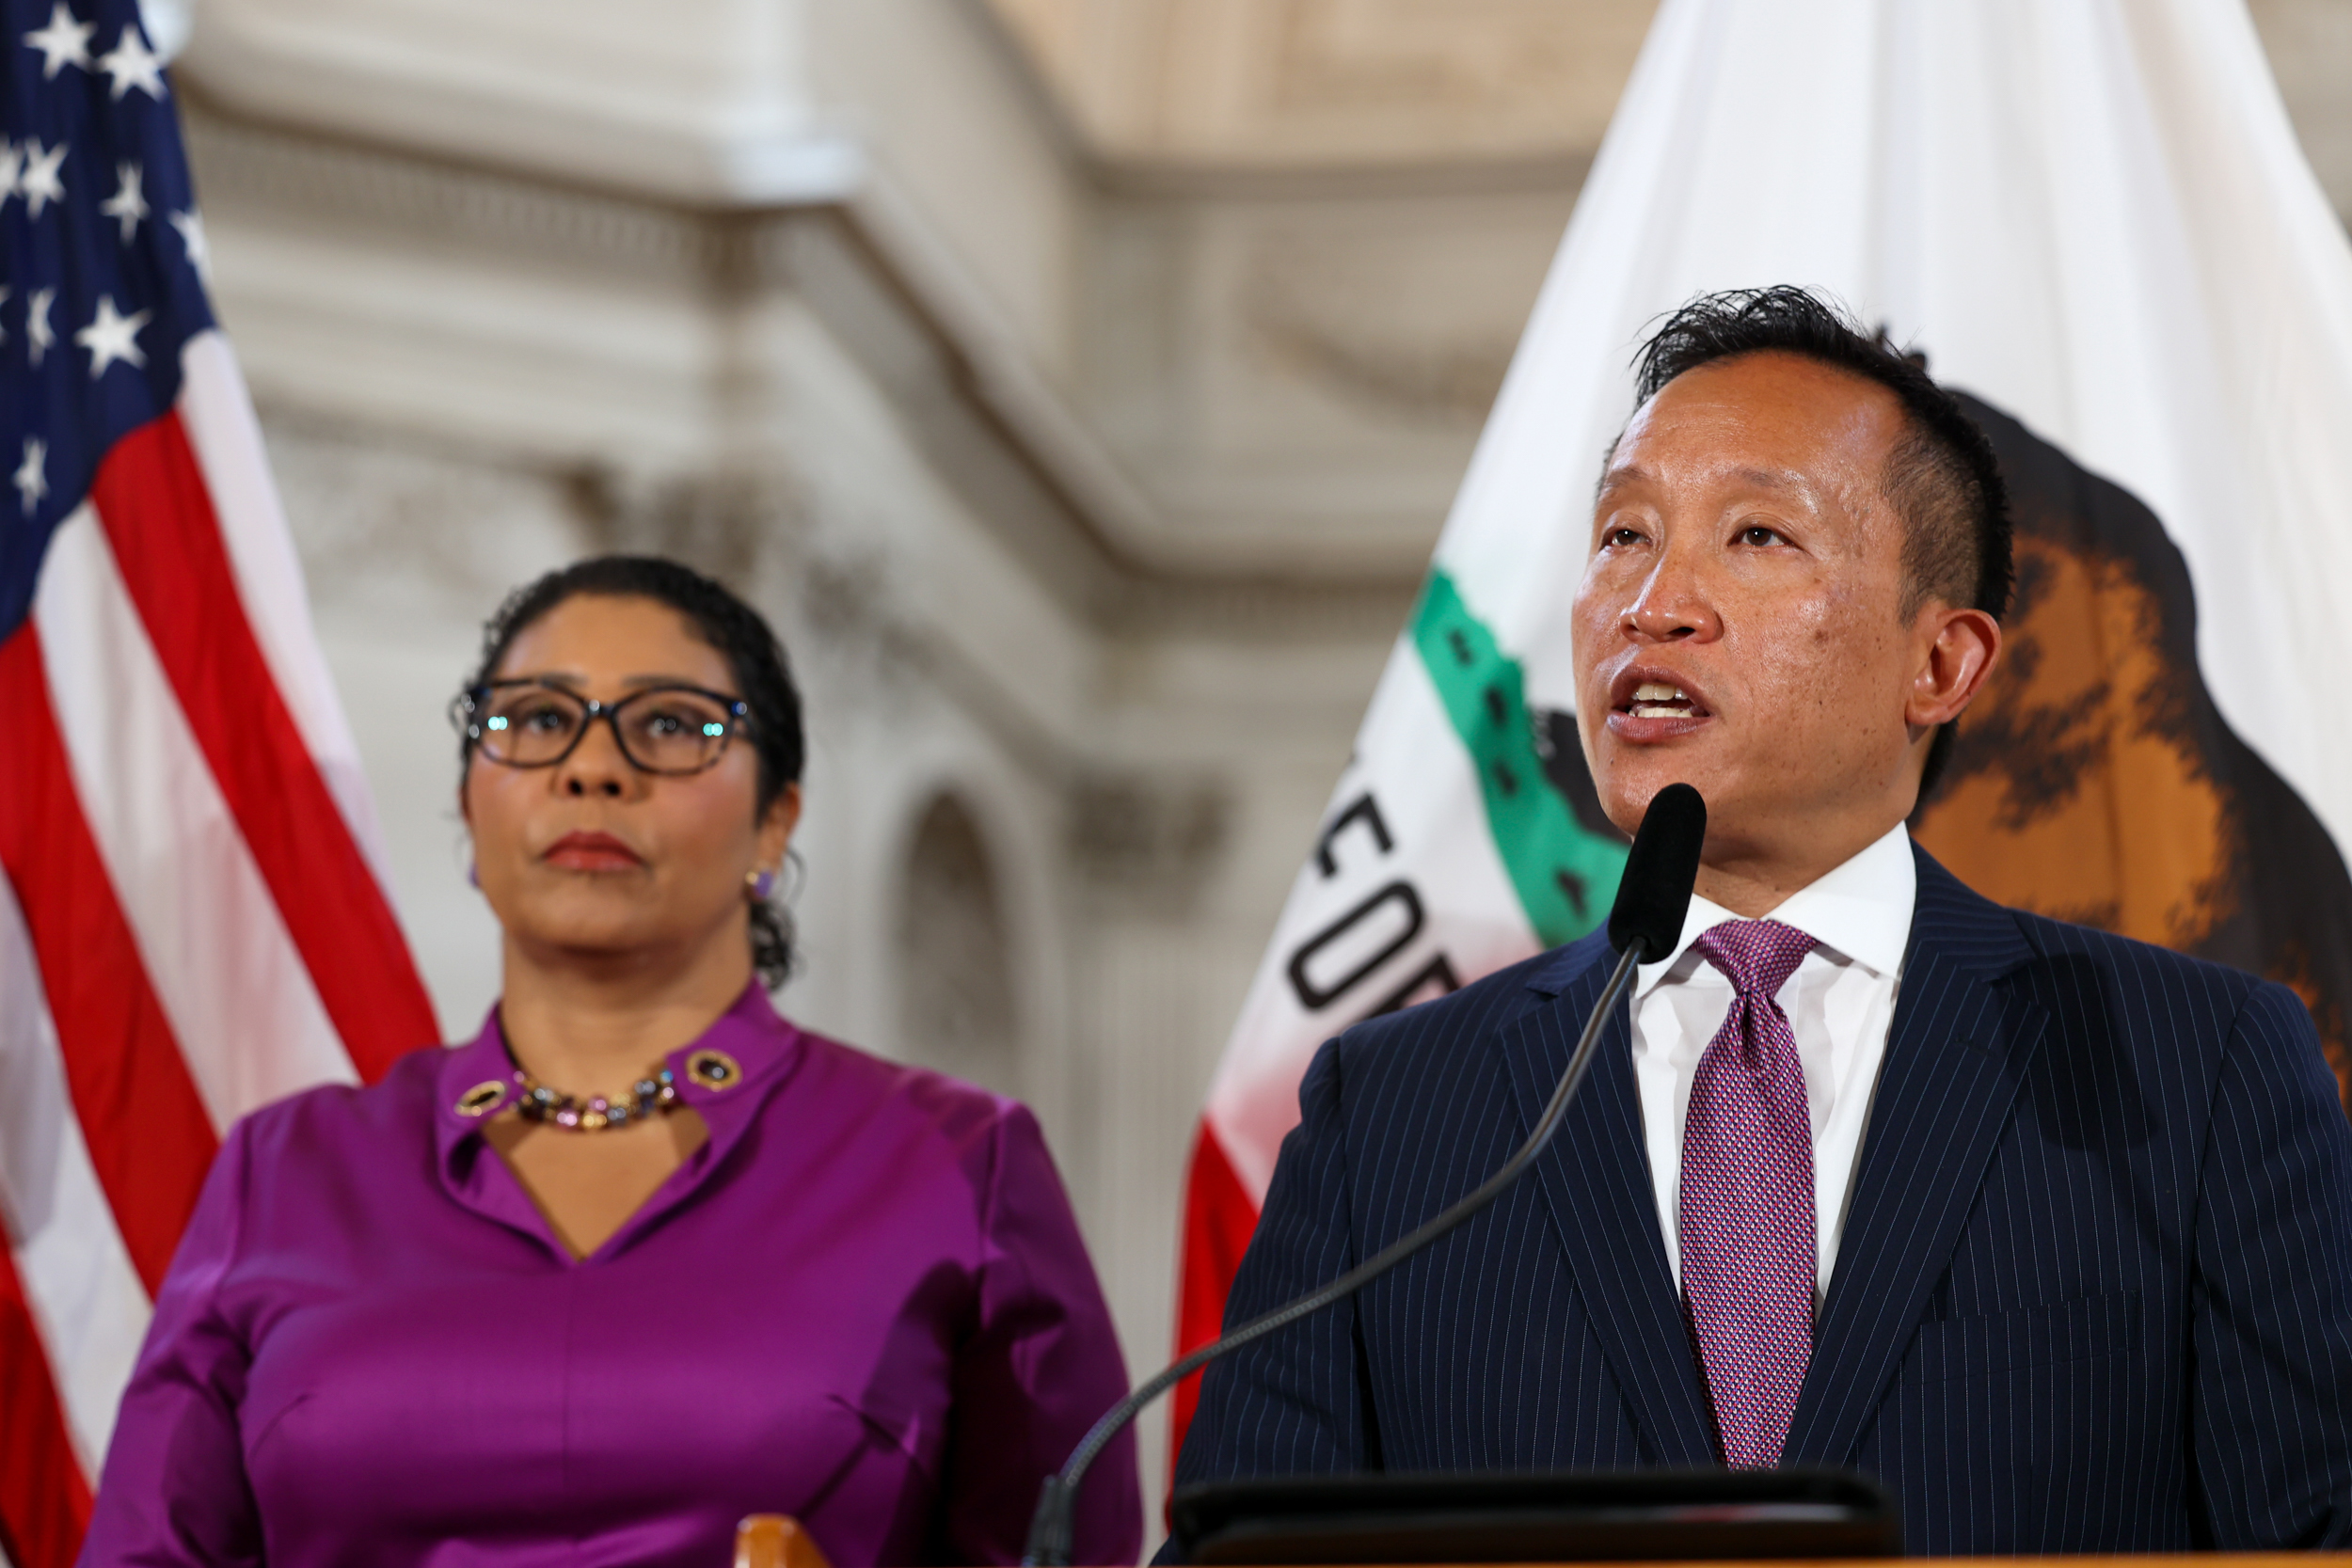 A man is speaking at a podium with microphones, a woman stands next to him, both in business attire, with the US and California flags behind them.